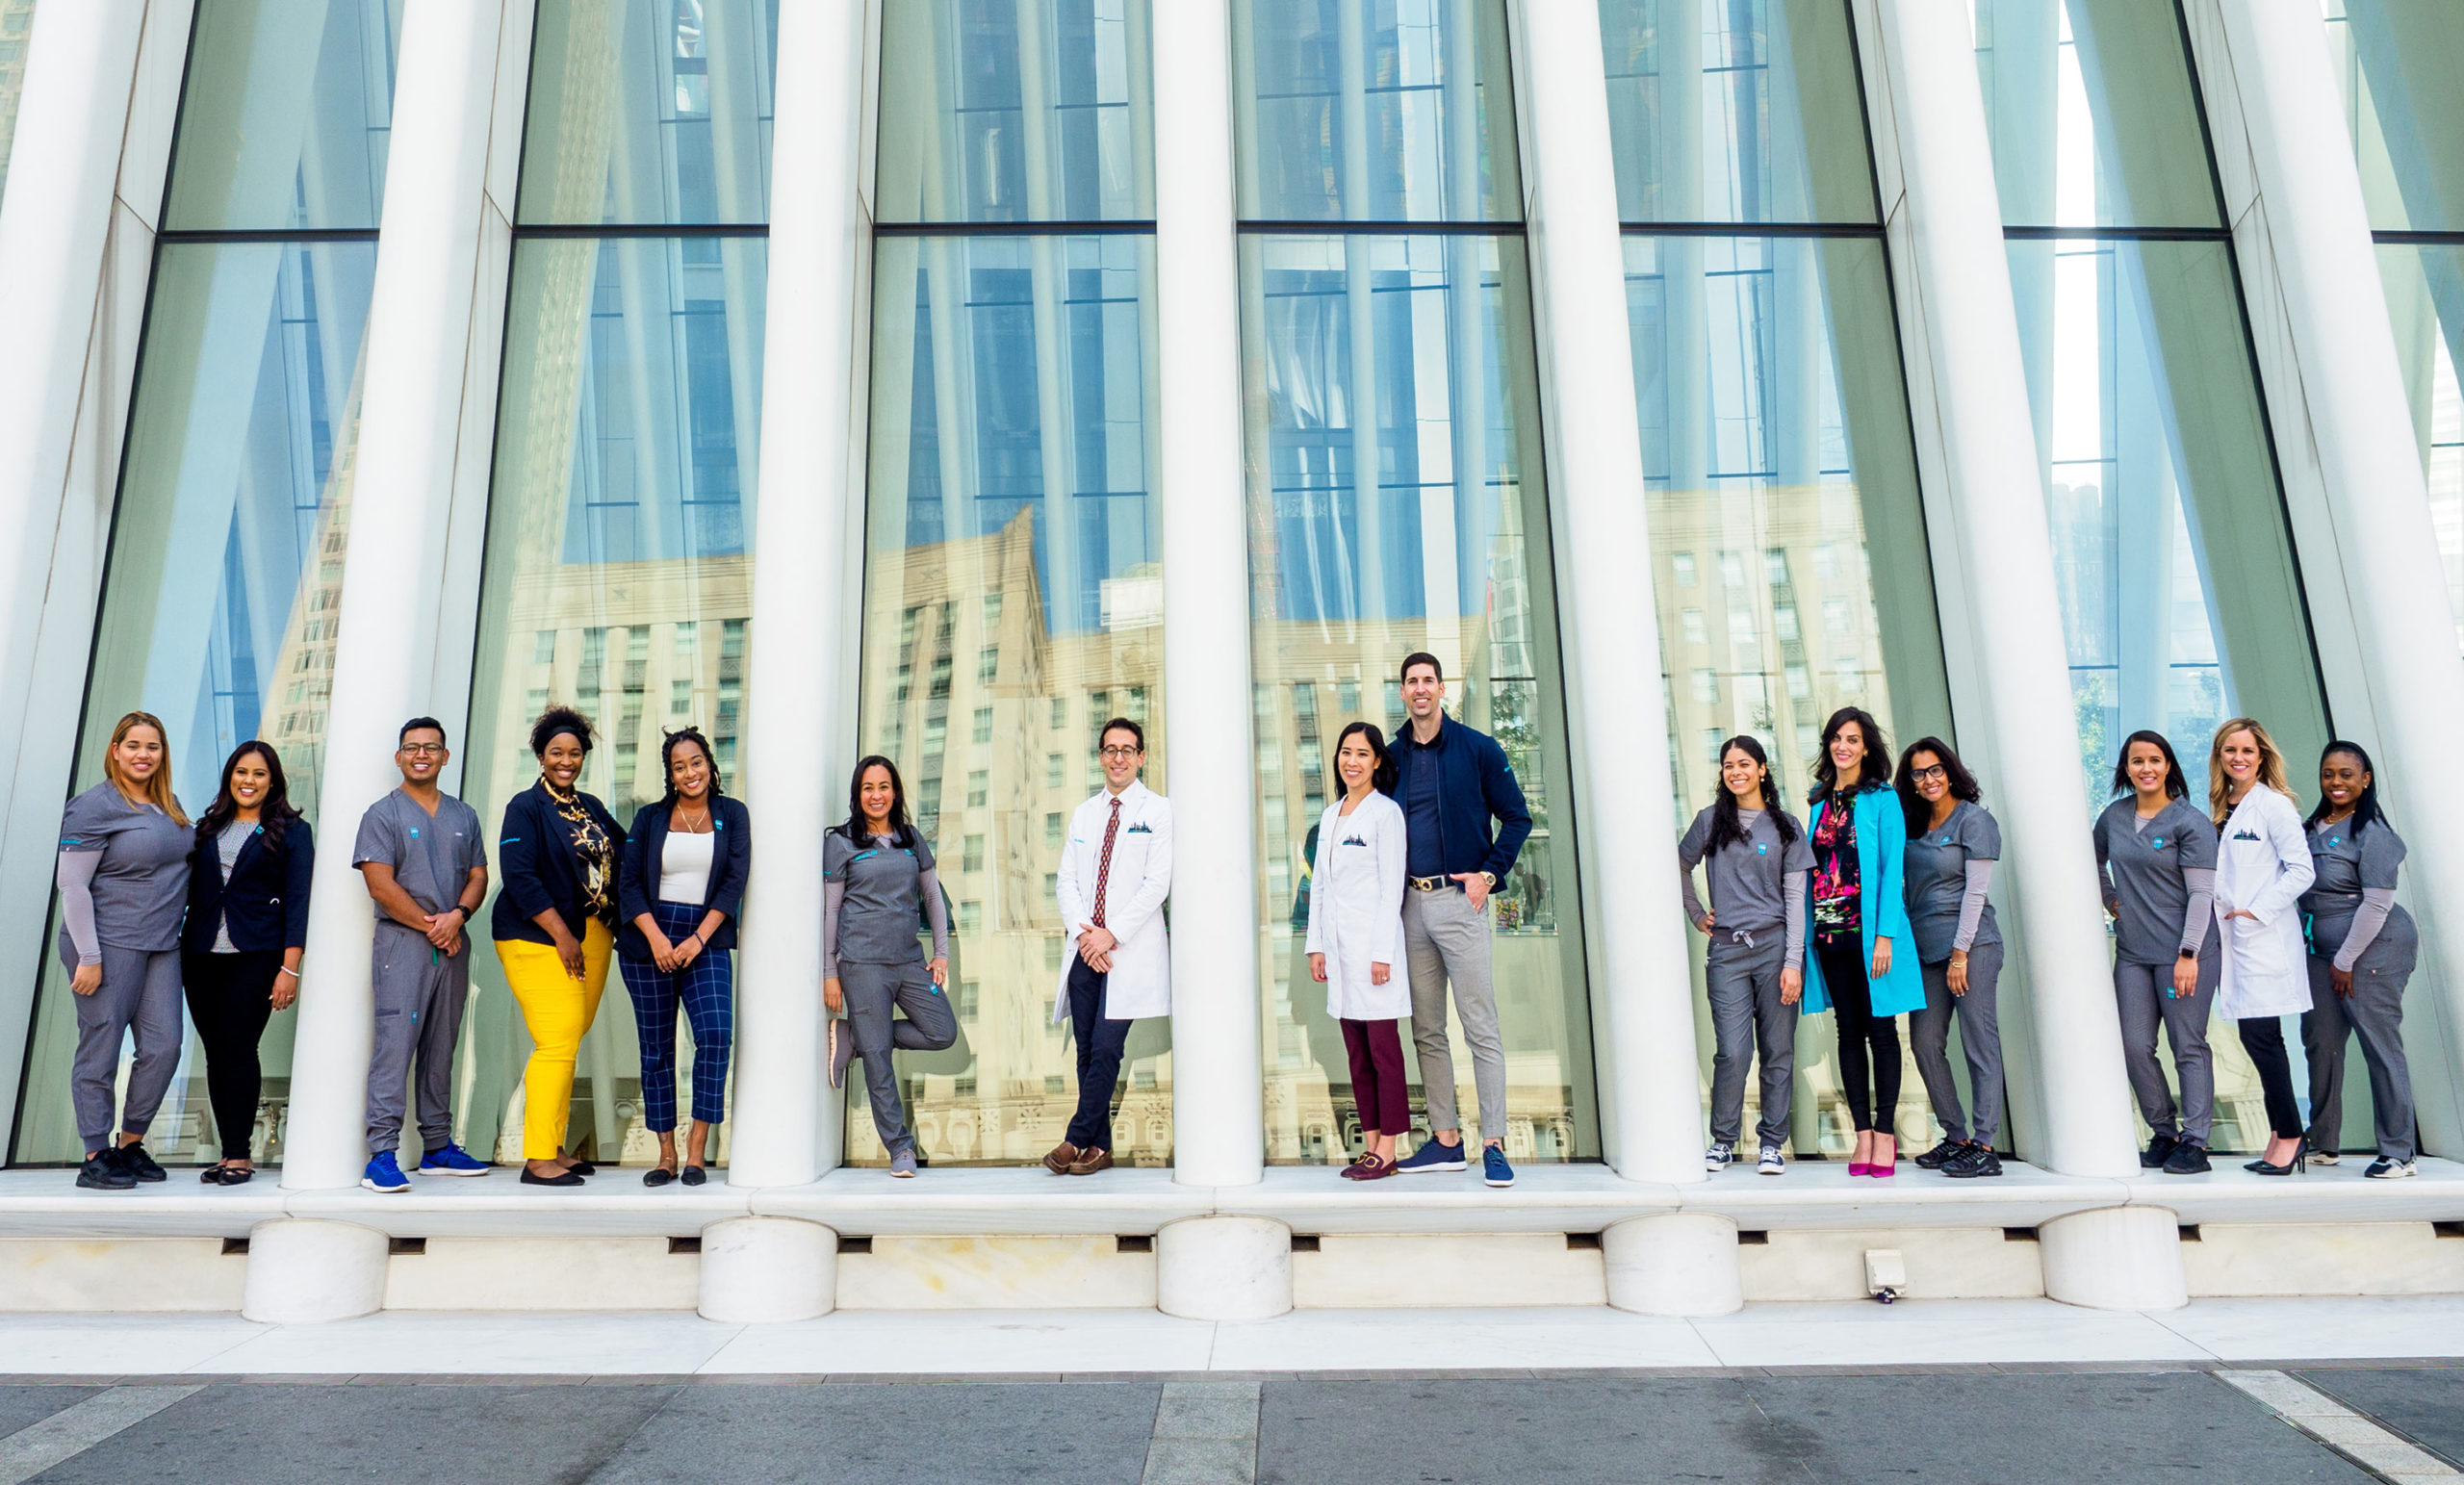 The Sky team poses outside the Oculus, framed by windows, in groups of two and three. Sky Dental, best dental practice in NYC.